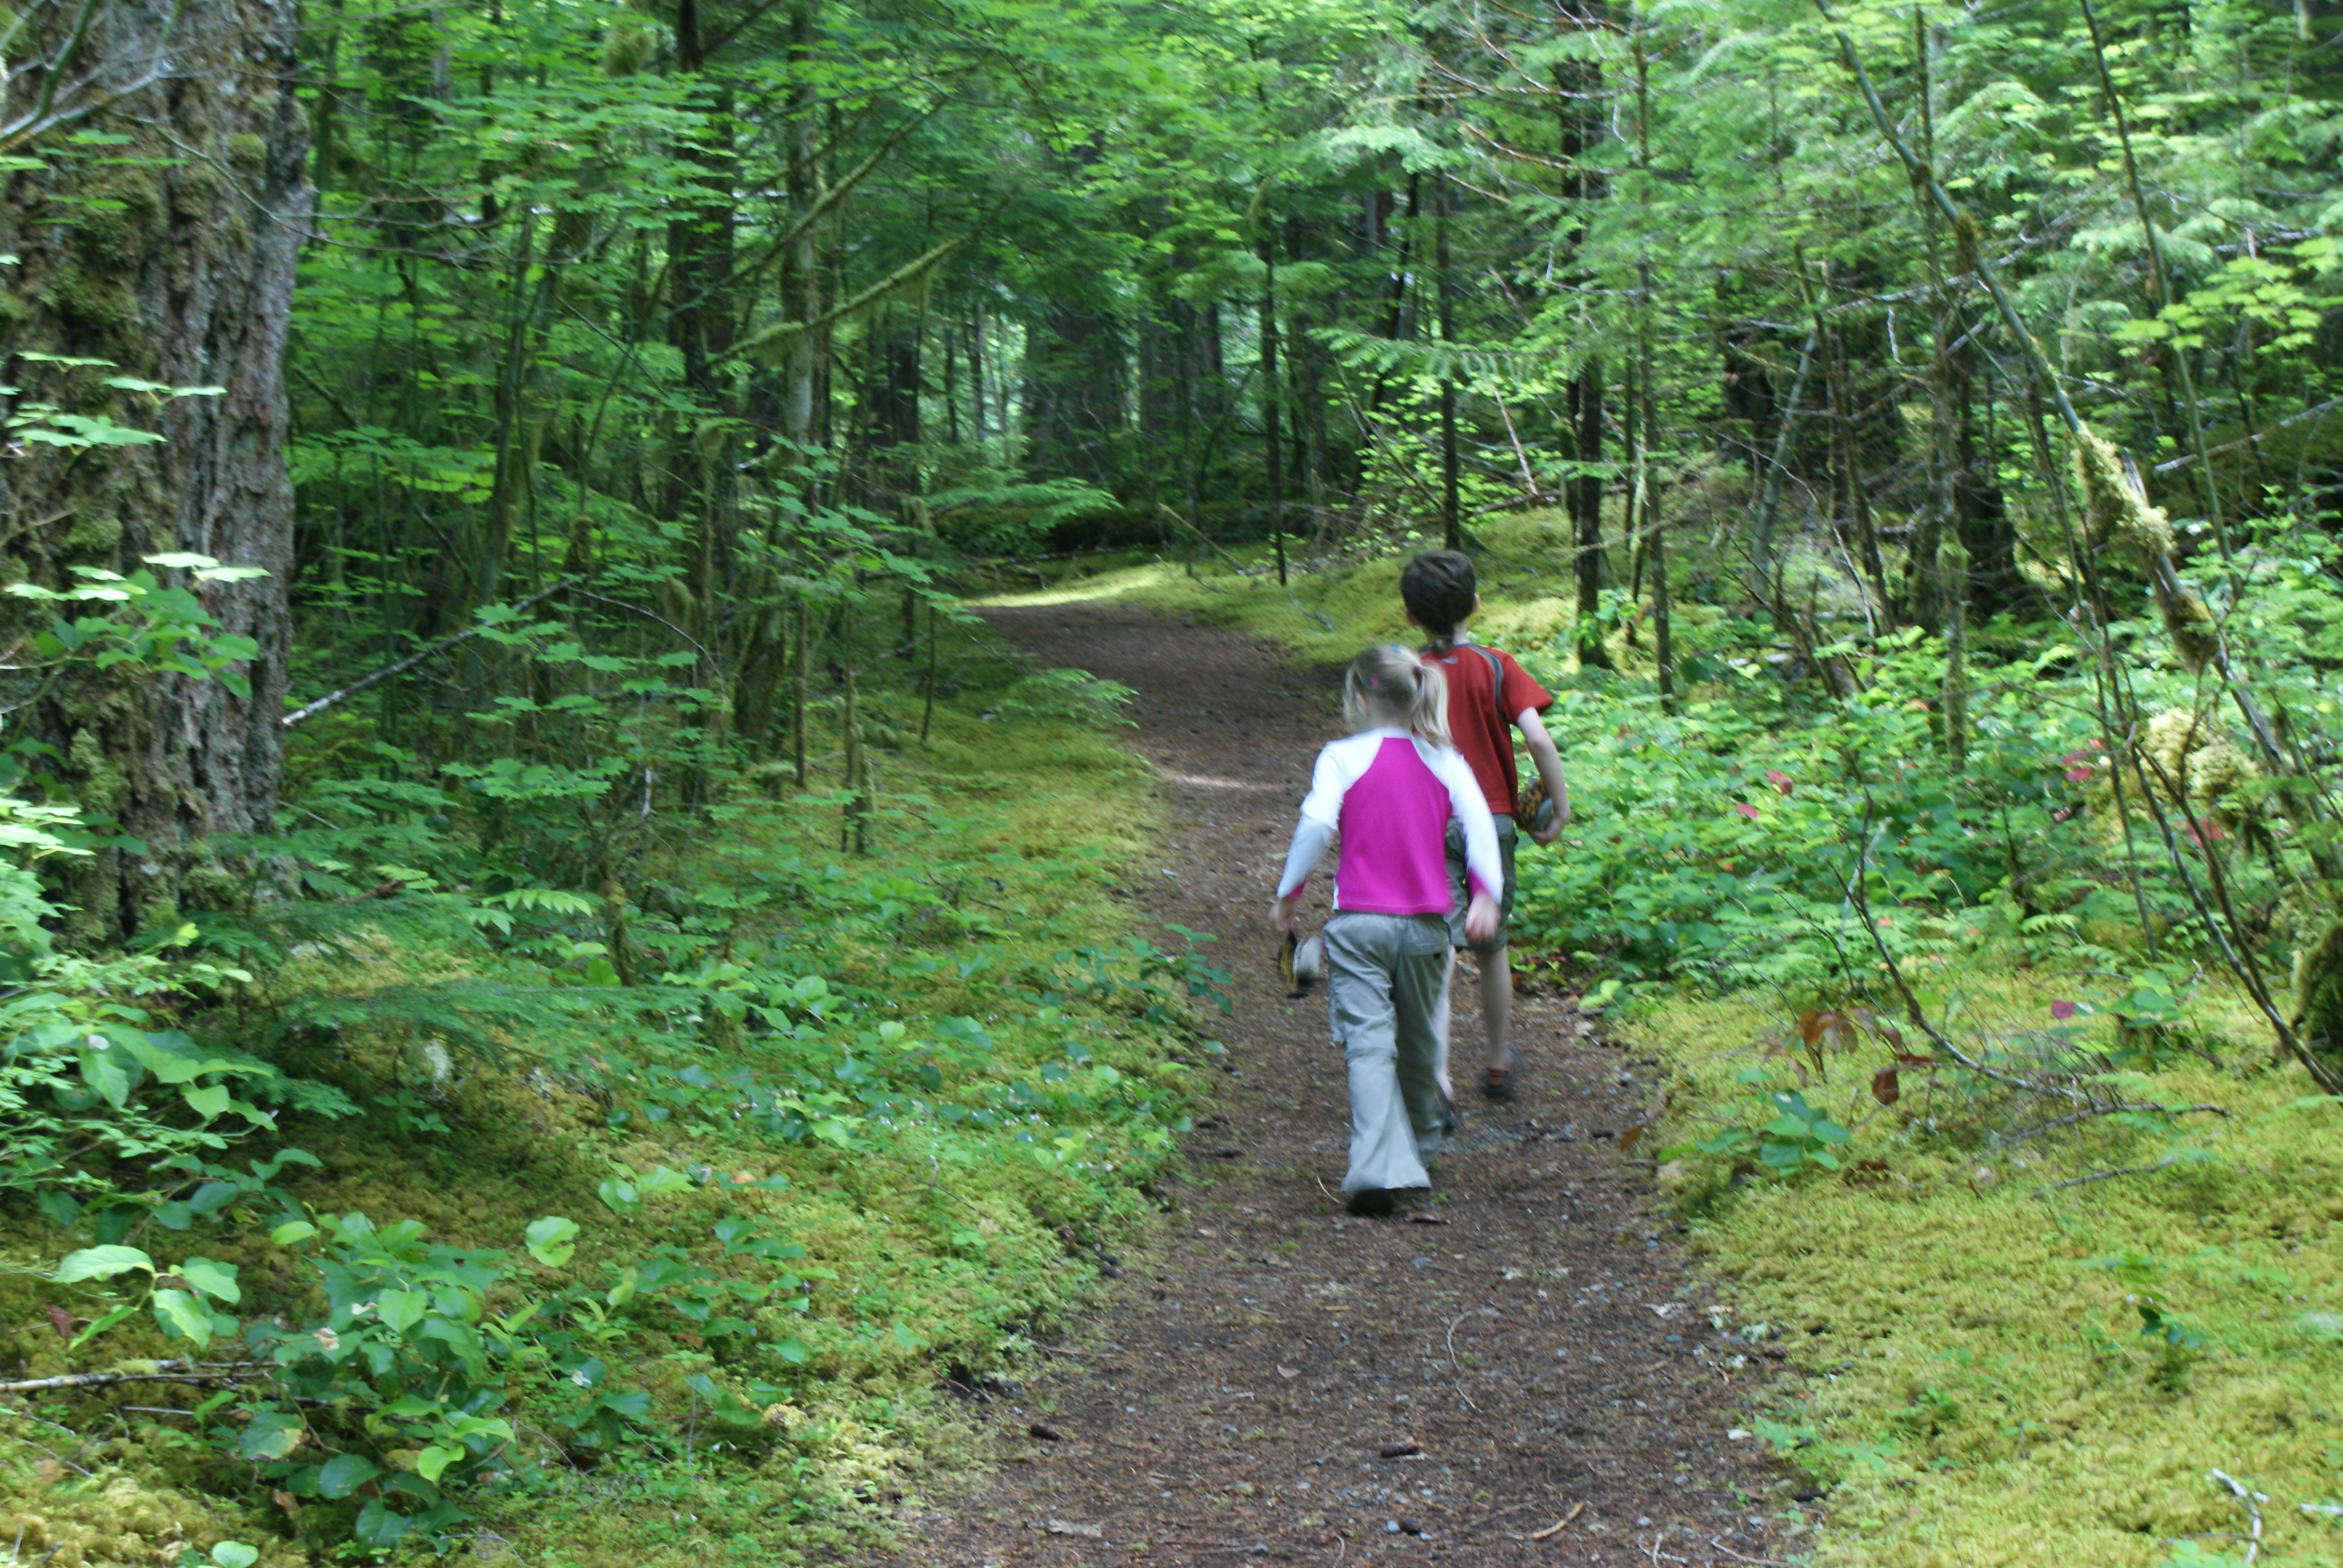 newhalem trails, hikes for kids, archaeology hikes, artifacts, ada accessible,